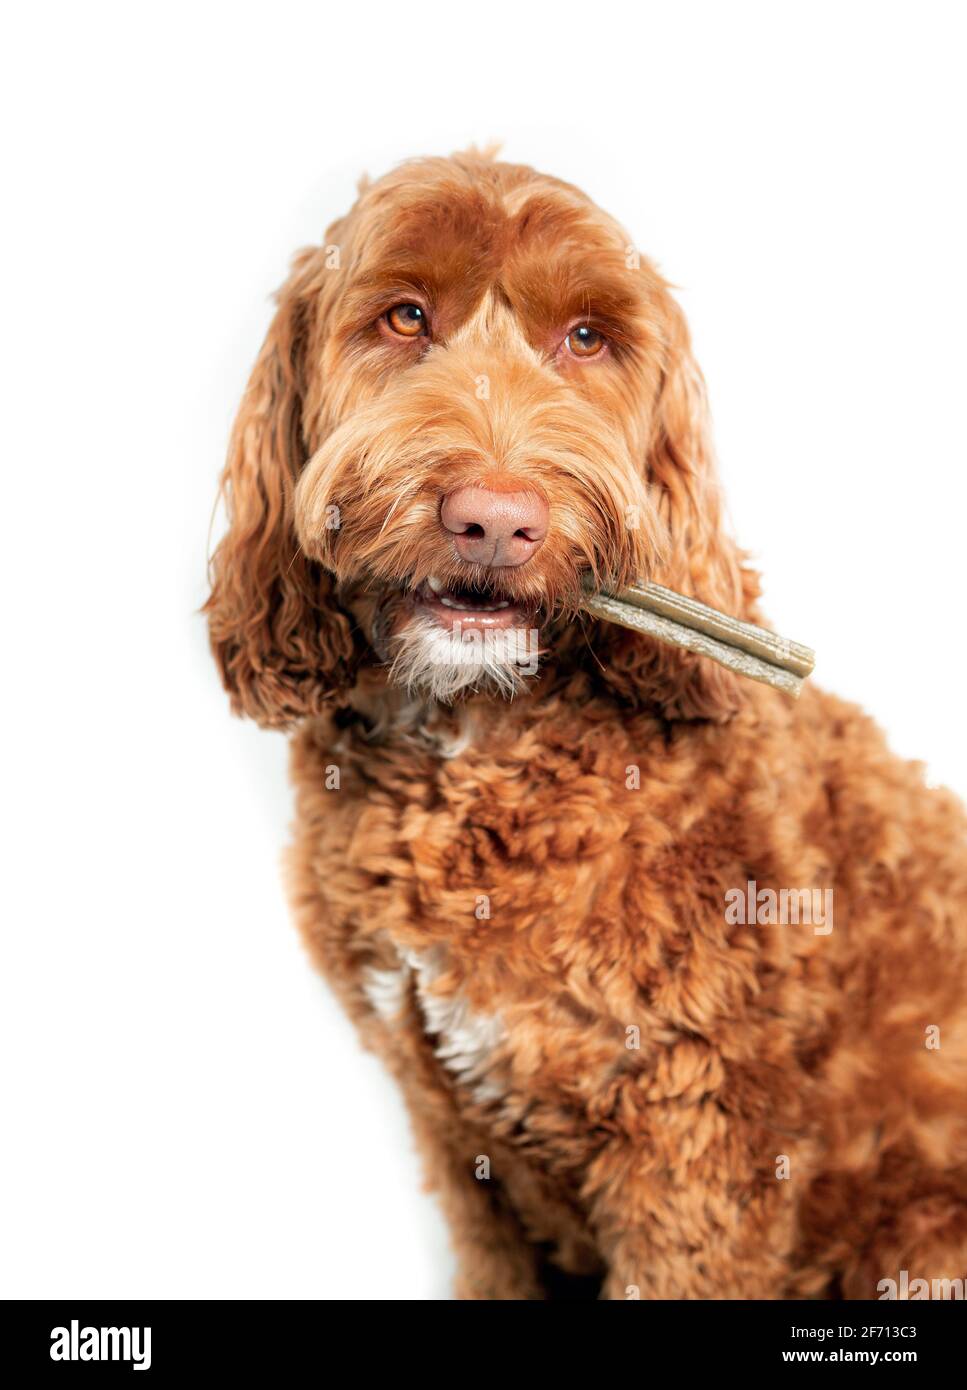 Dog with dental chew stick in mouth. Labradoodle dog with long bone to the side, like a cigarette. White teeth and fangs visible. Concept for dental h Stock Photo